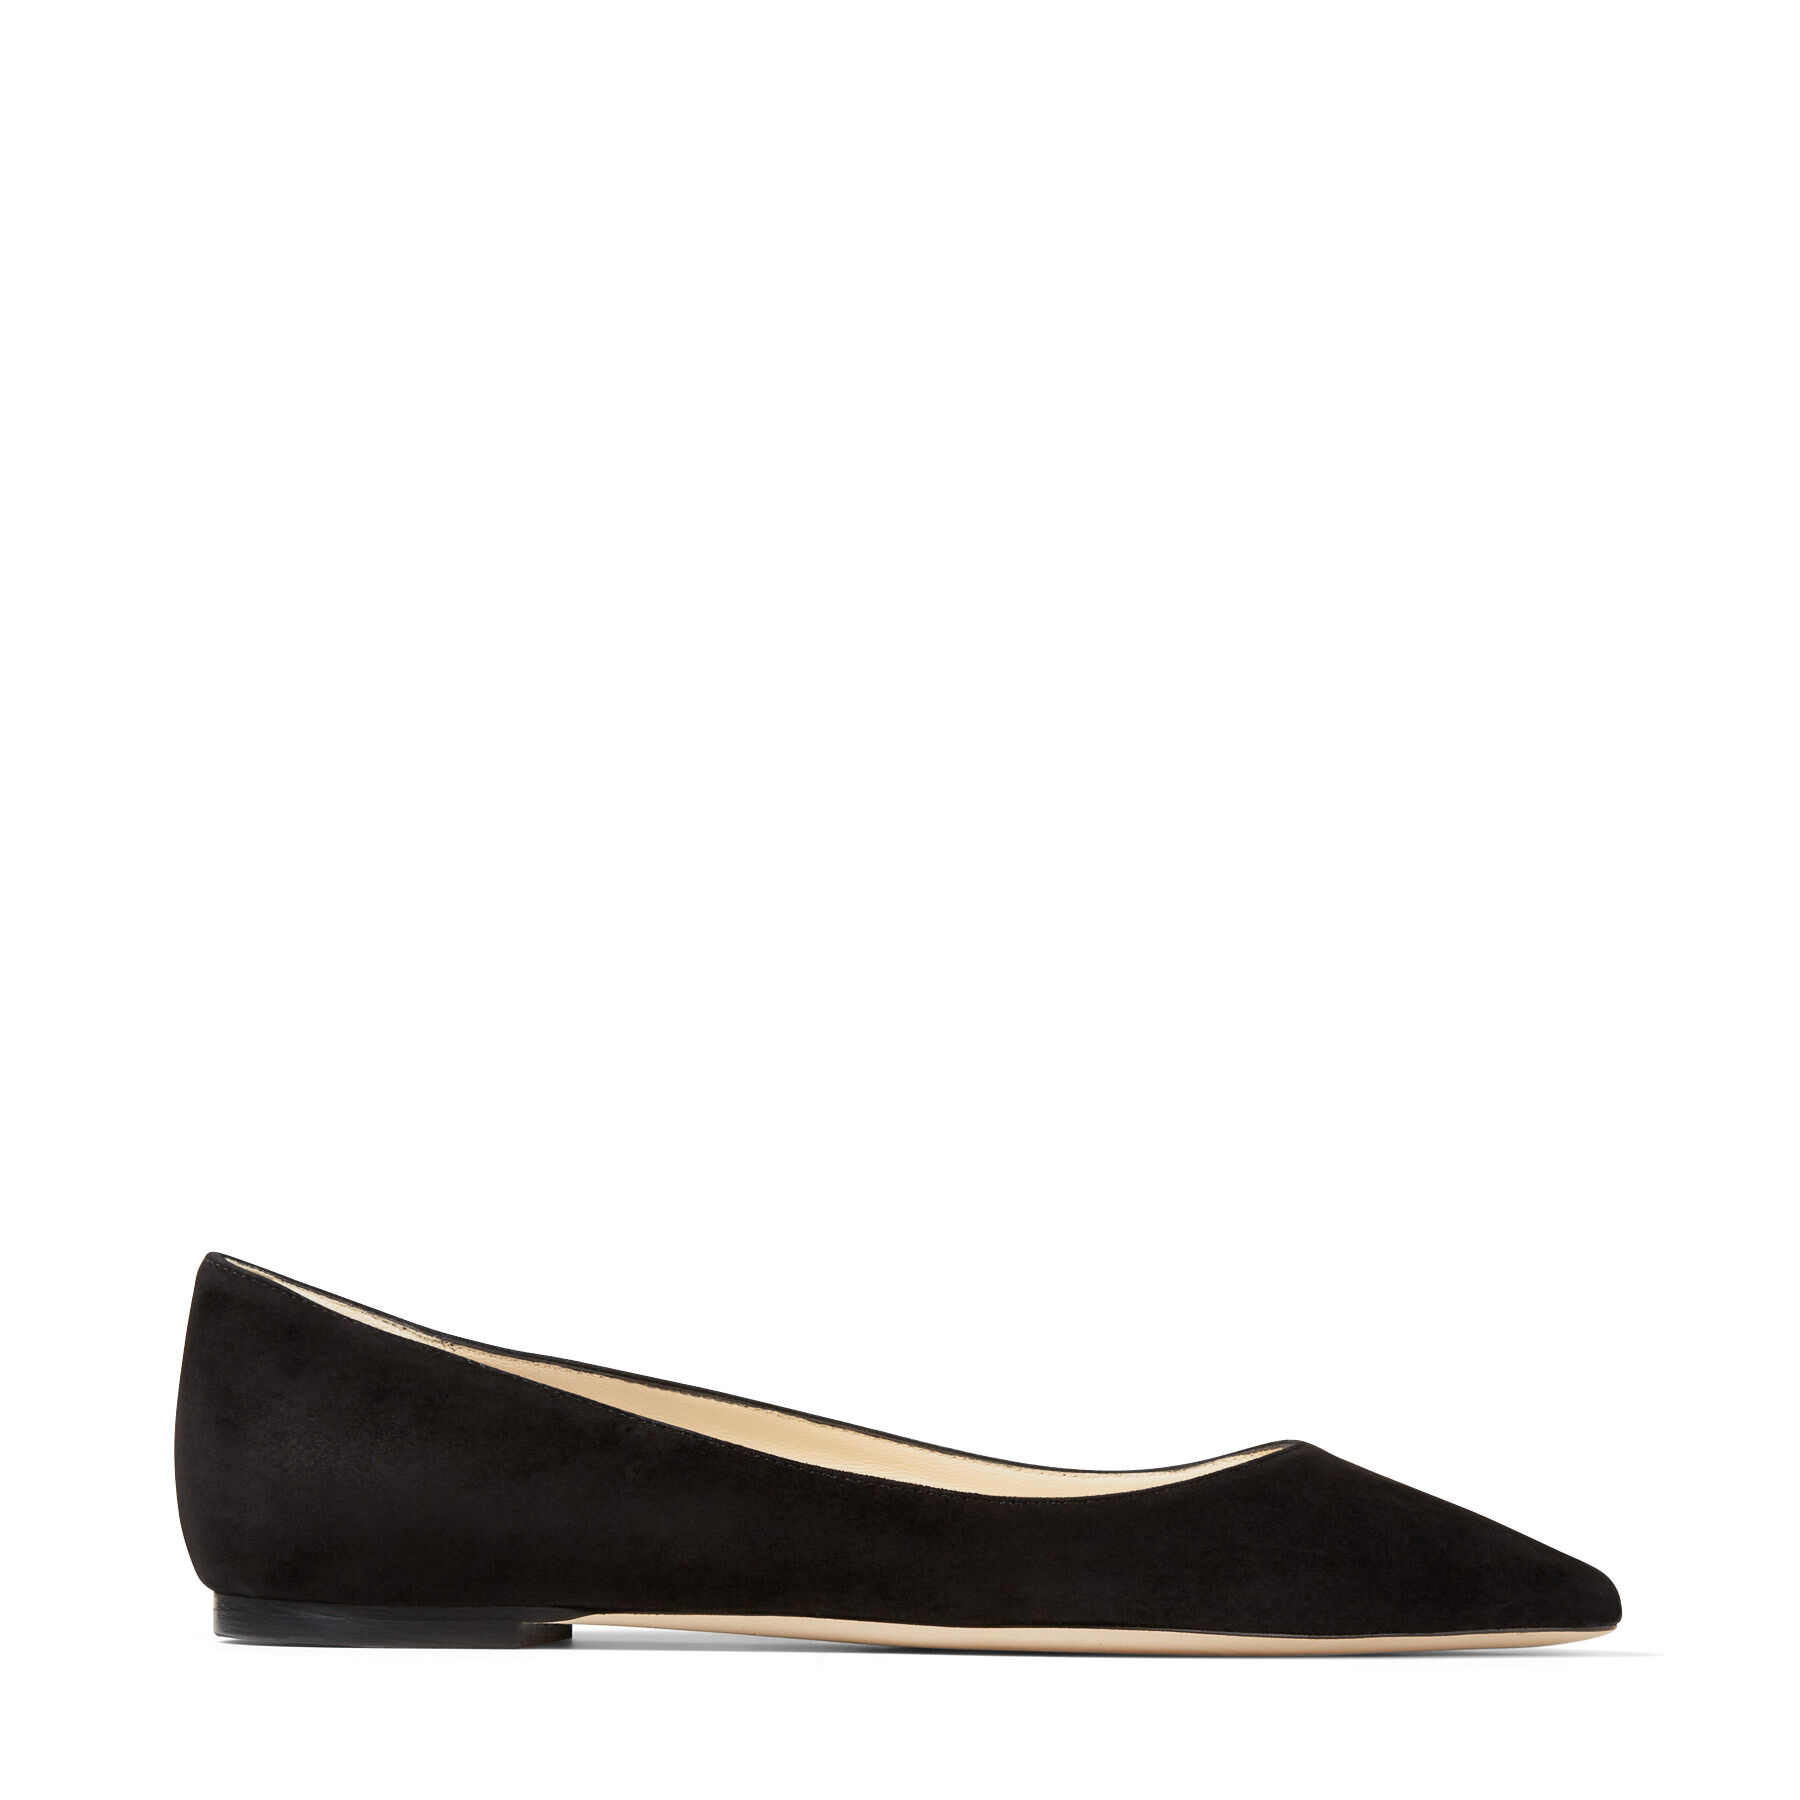 Black Suede Pointy Toe Flats | Romy Flat | 24:7 Collection| JIMMY CHOO